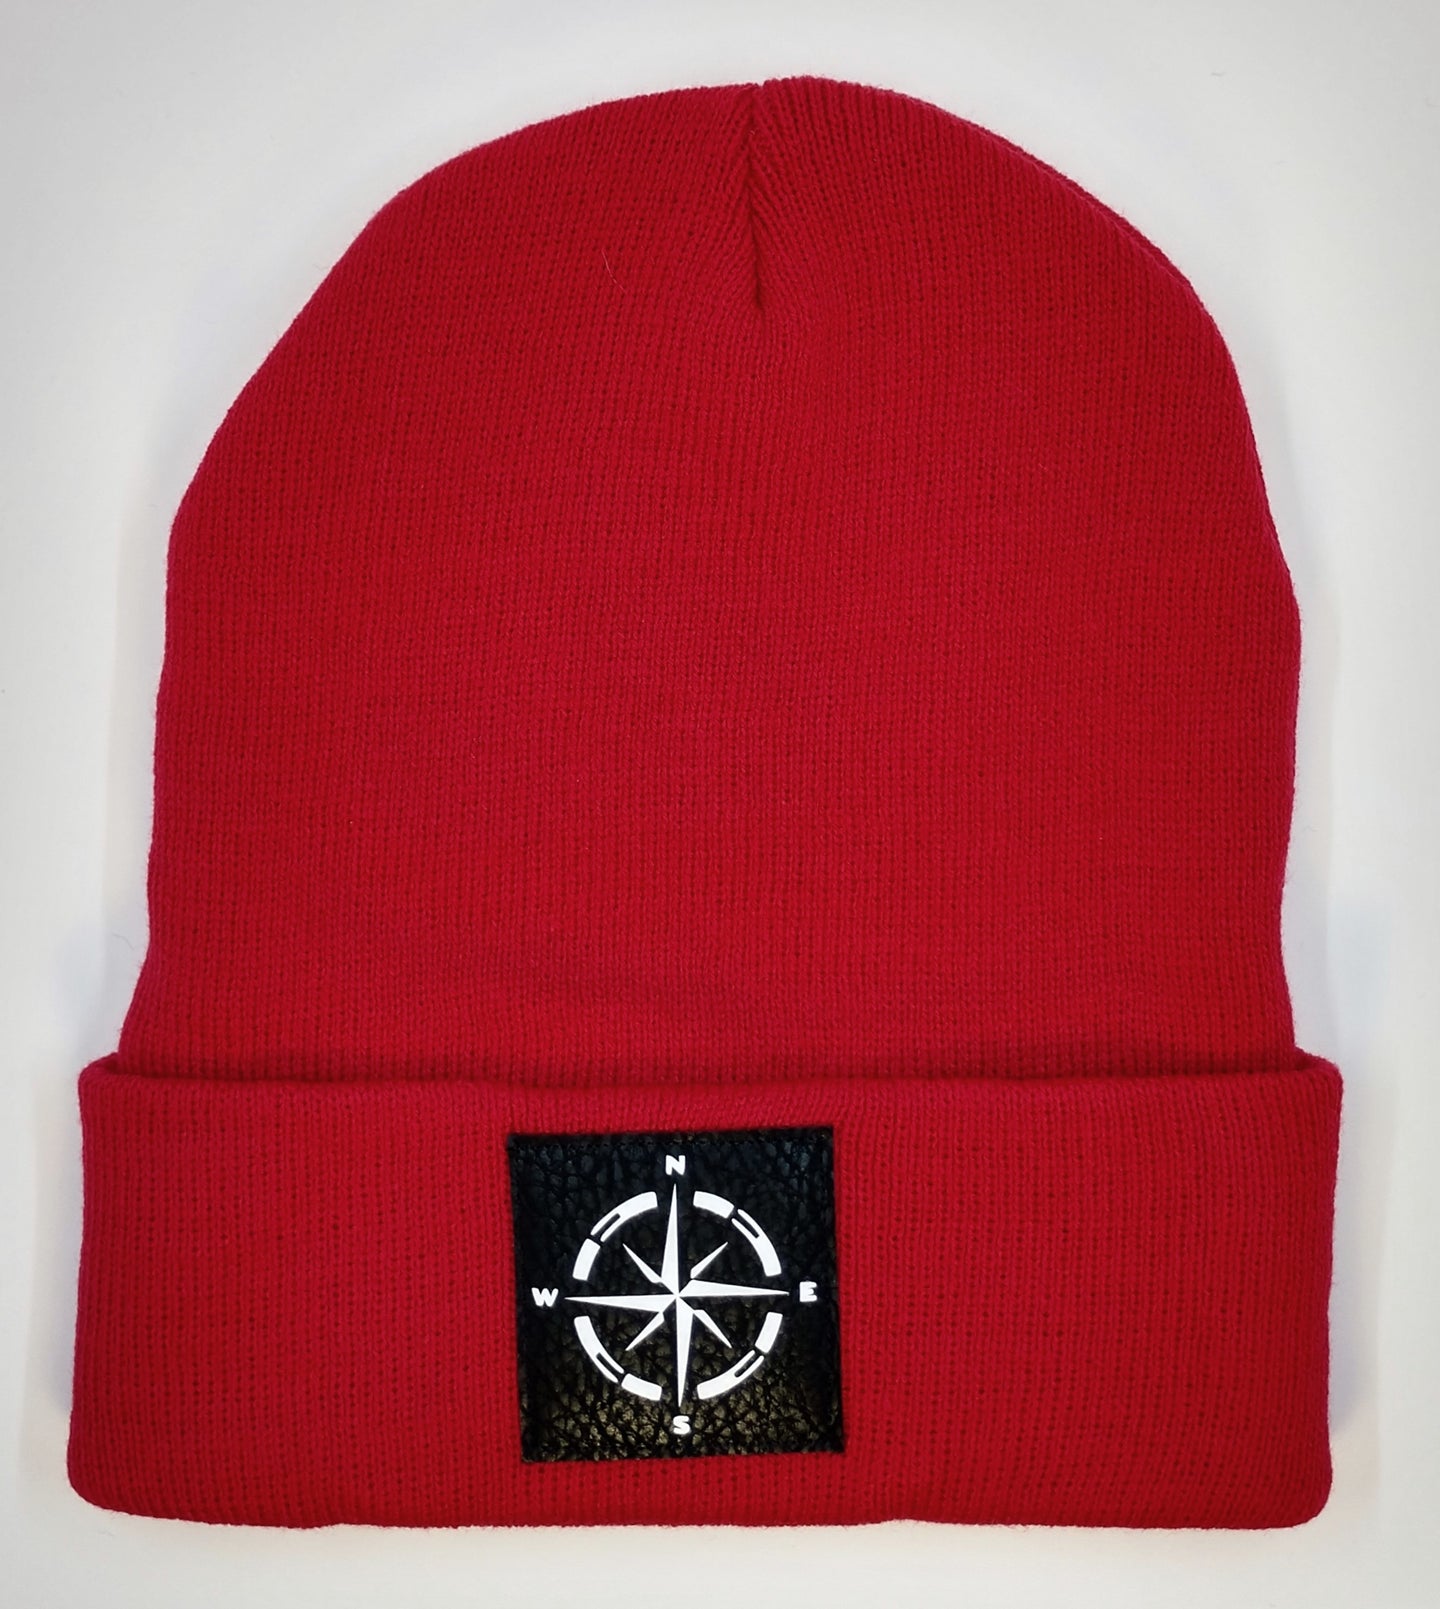 Find your true North with your Compass Buddha Beanie! Wearing a compass over your third eye is a great that it's never too late in life to change or alter your course.  The compass points in four directions; North, South, East and West, harkening back to sailors and ships traversing the stormy seas on their way home from a long journey. The compass holds meaning for a traveler, being a symbol for guidance, the ability to point you in the right direction.